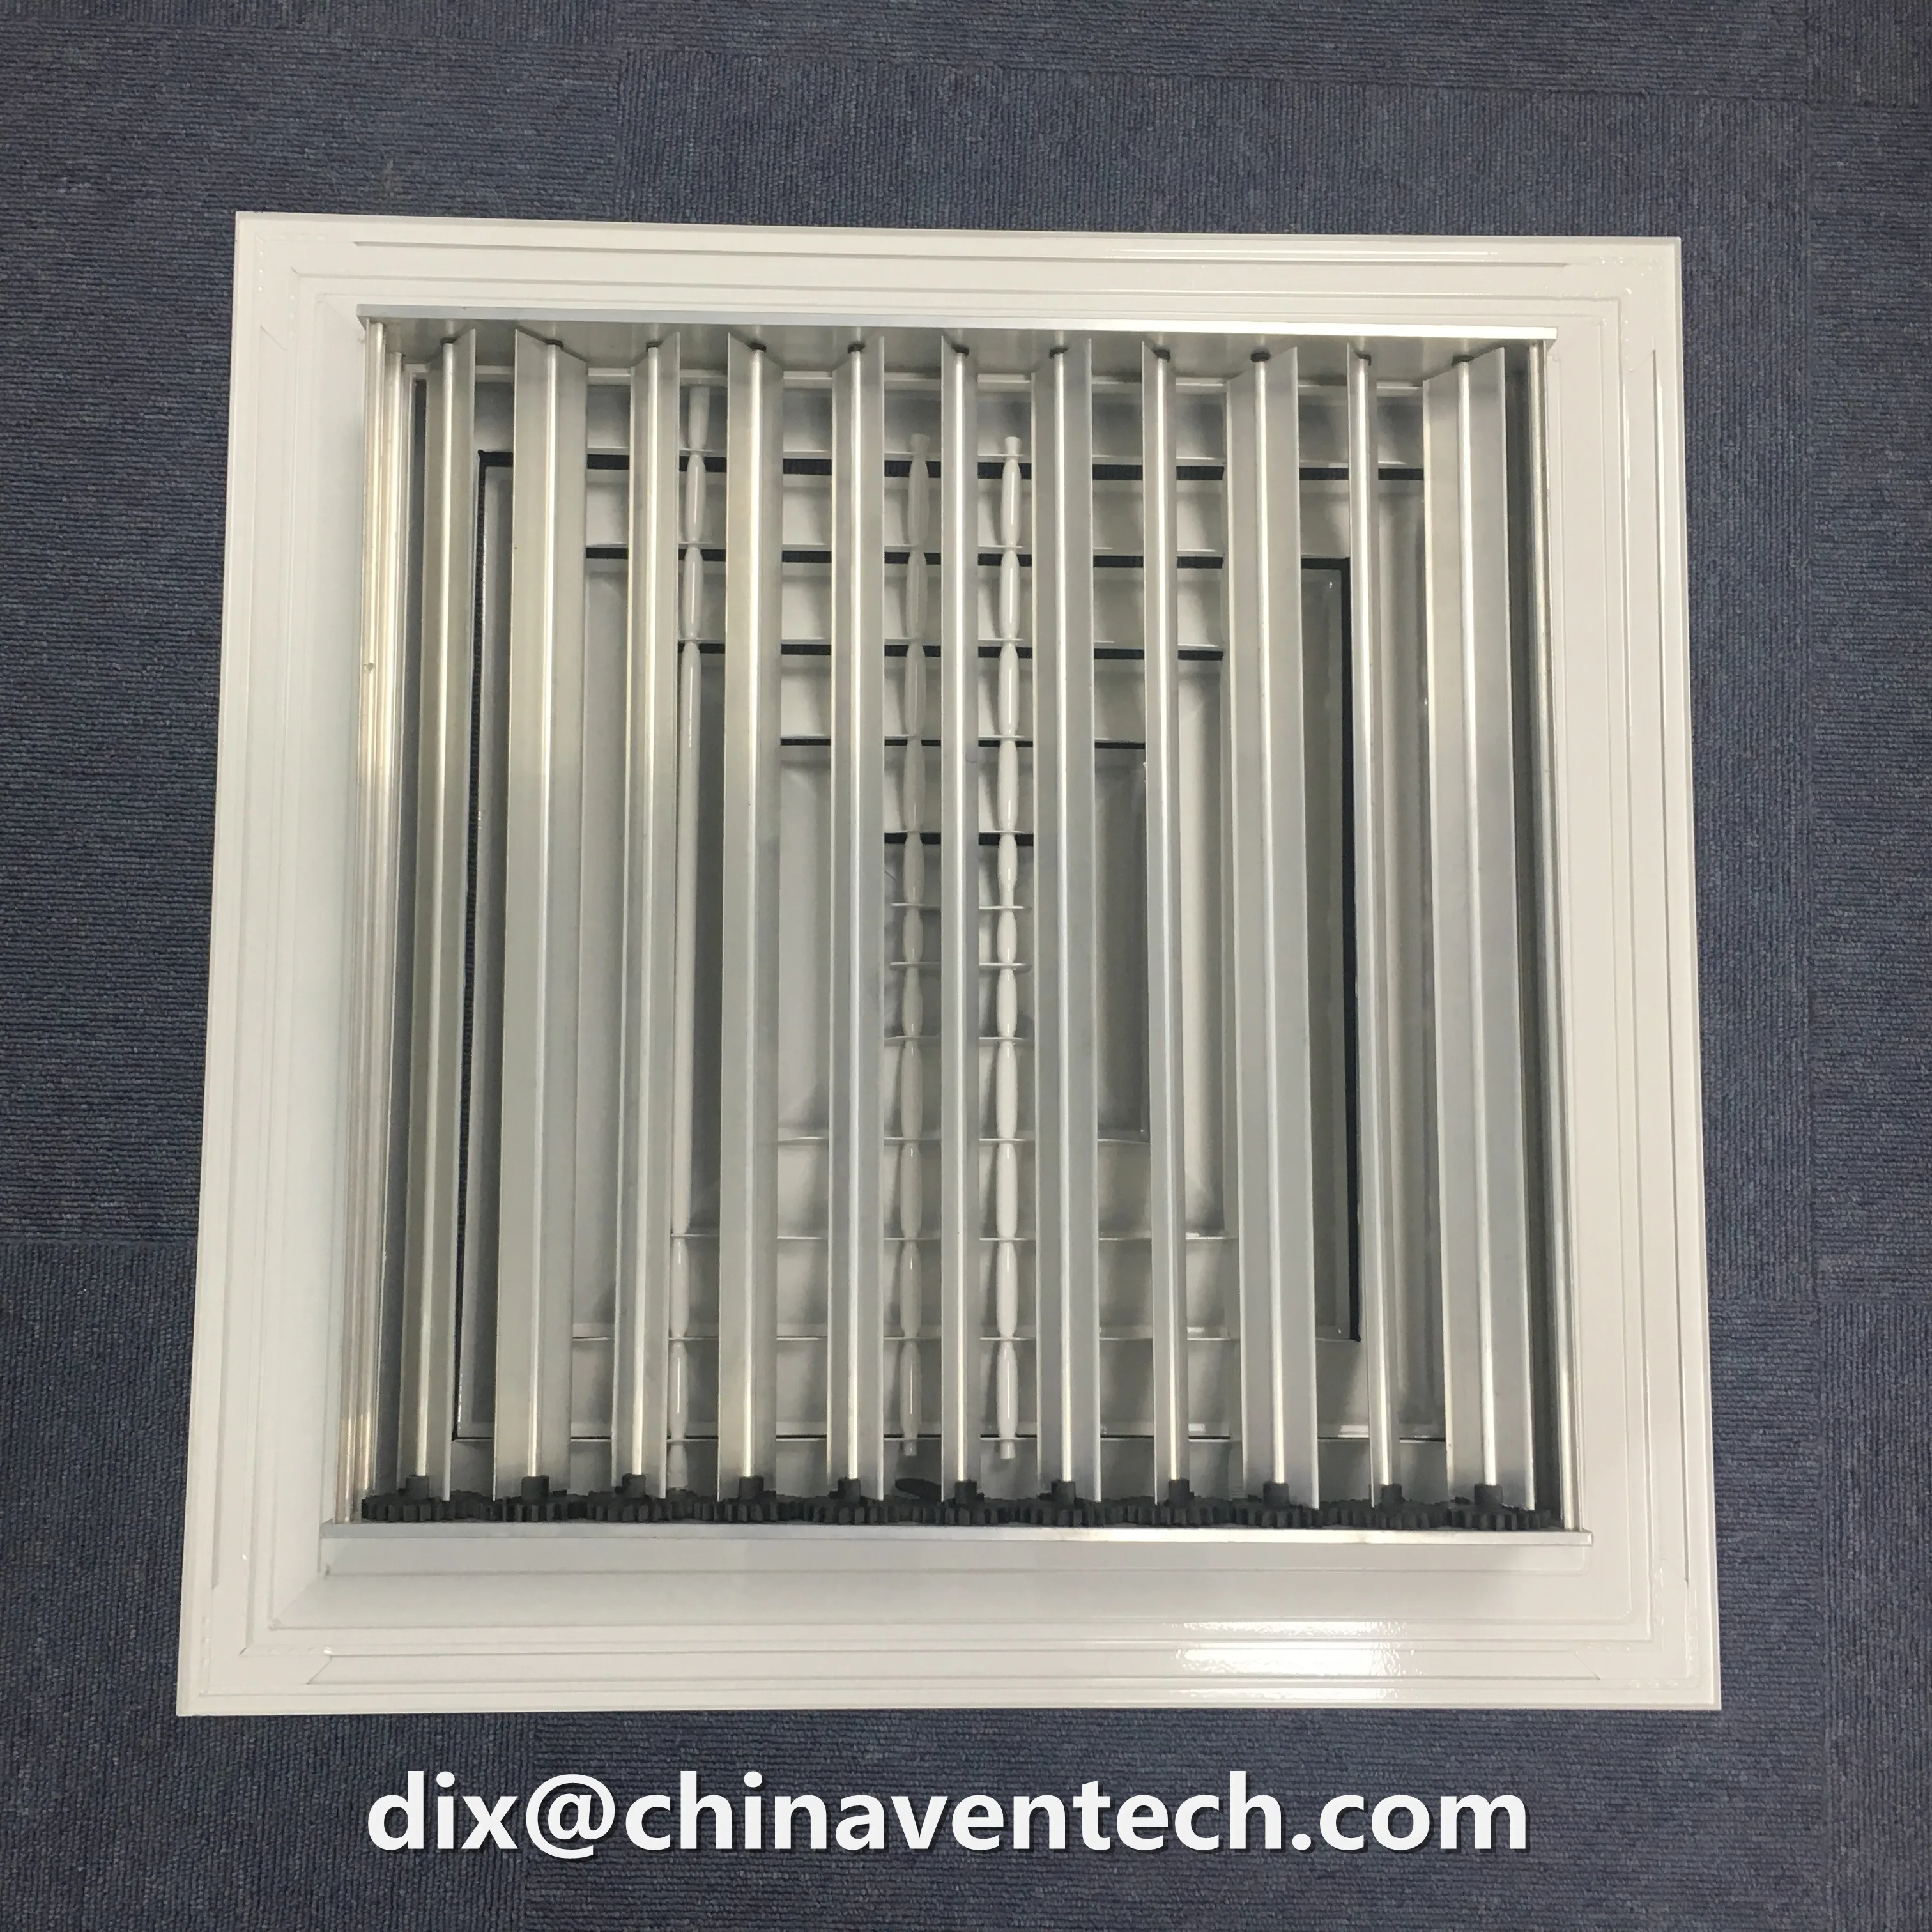 Ventech factory industrial project ventilation louver faced square 4 way directional ceiling diffuser